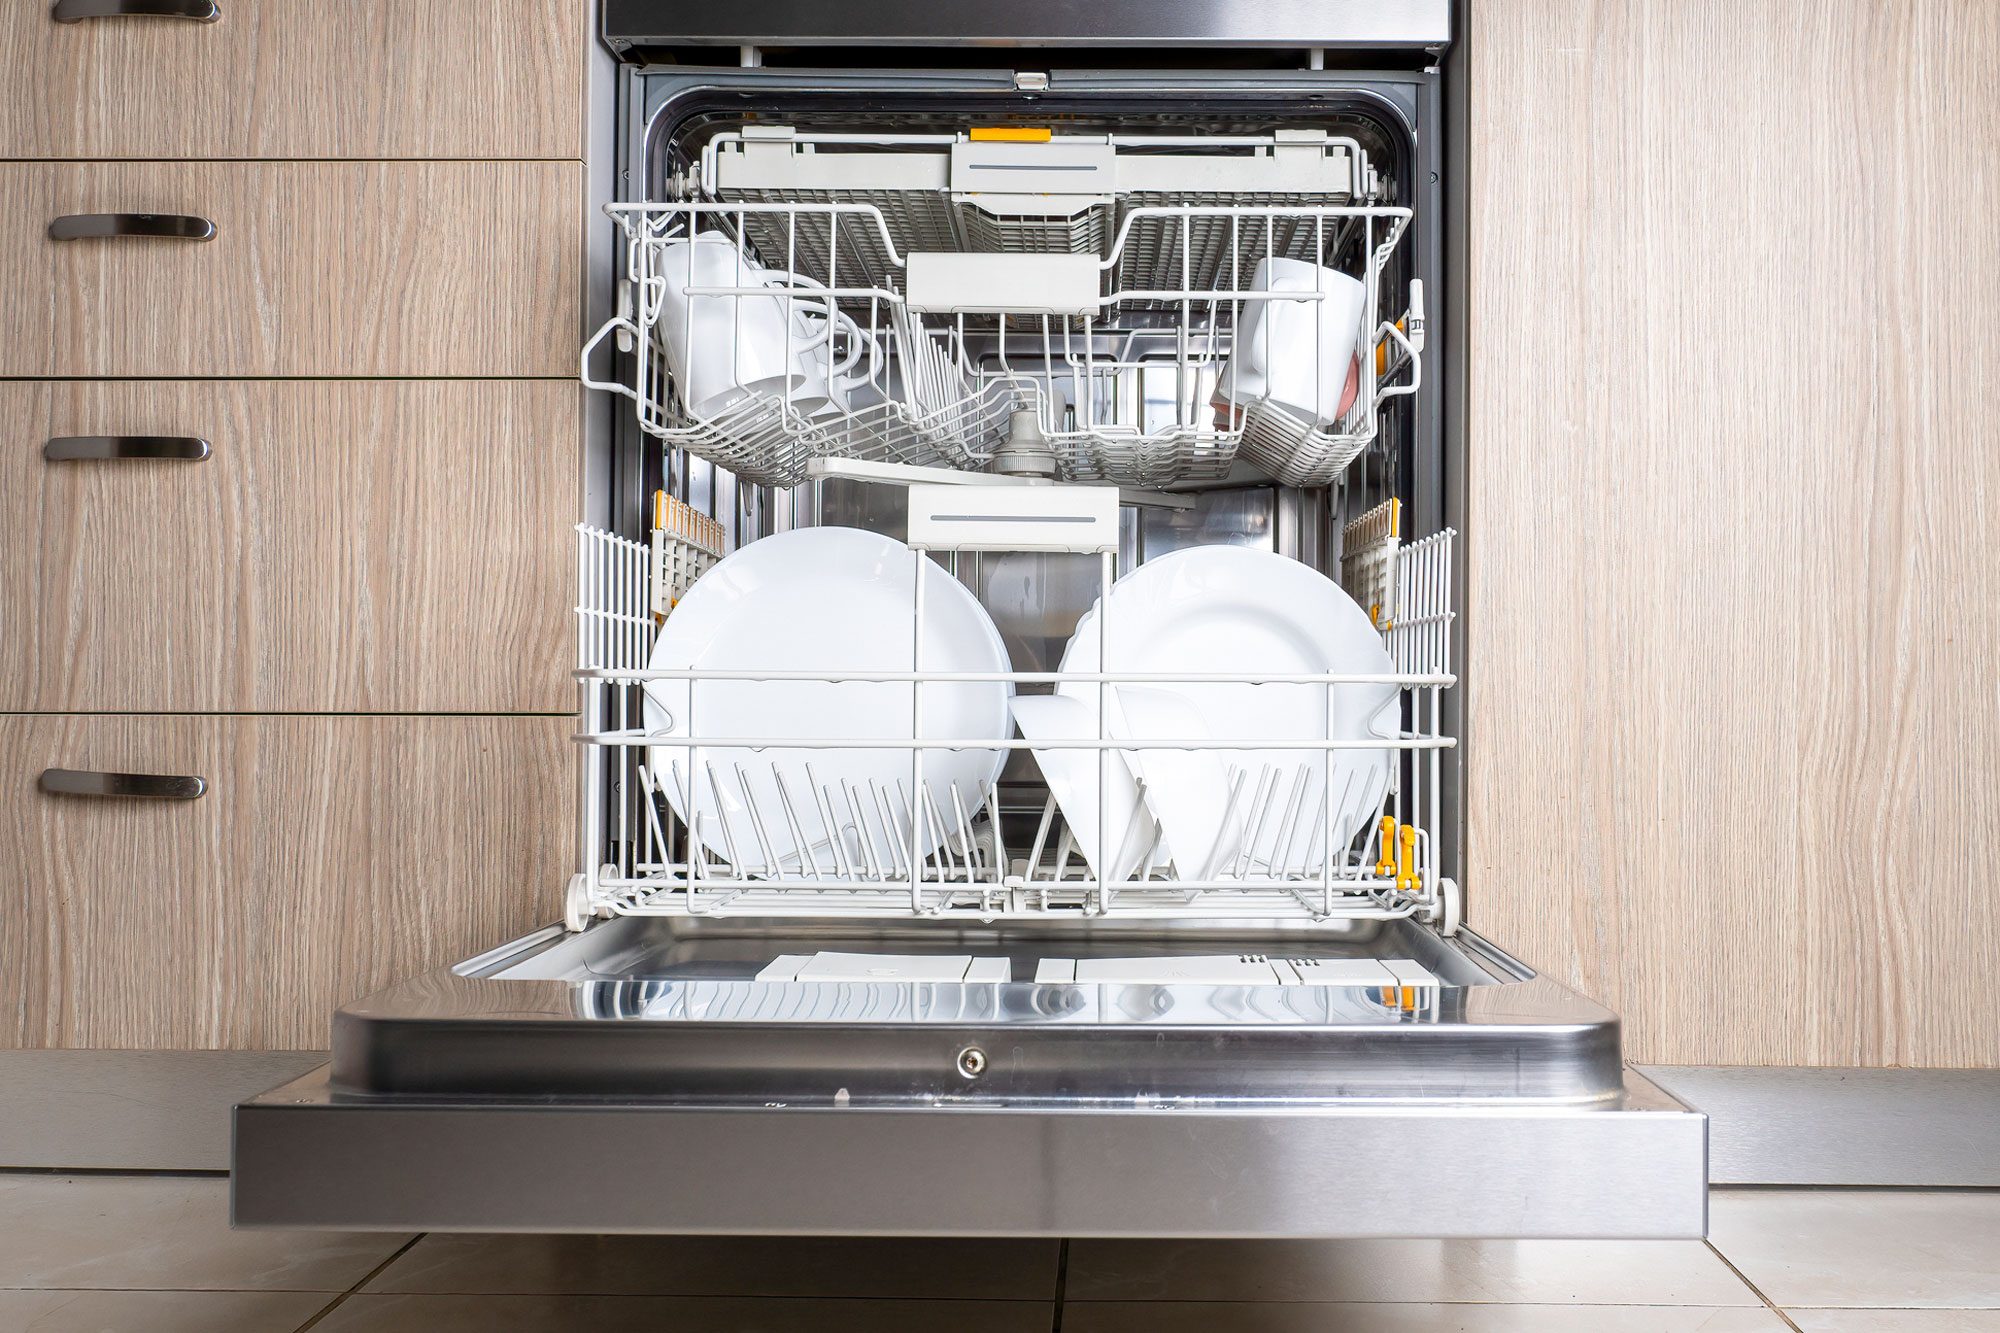 https://www.rd.com/wp-content/uploads/2023/11/Plates-and-dishes-in-the-built-in-dishwasher-in-kitchen-GettyImages-1403871214_KSedit.jpg